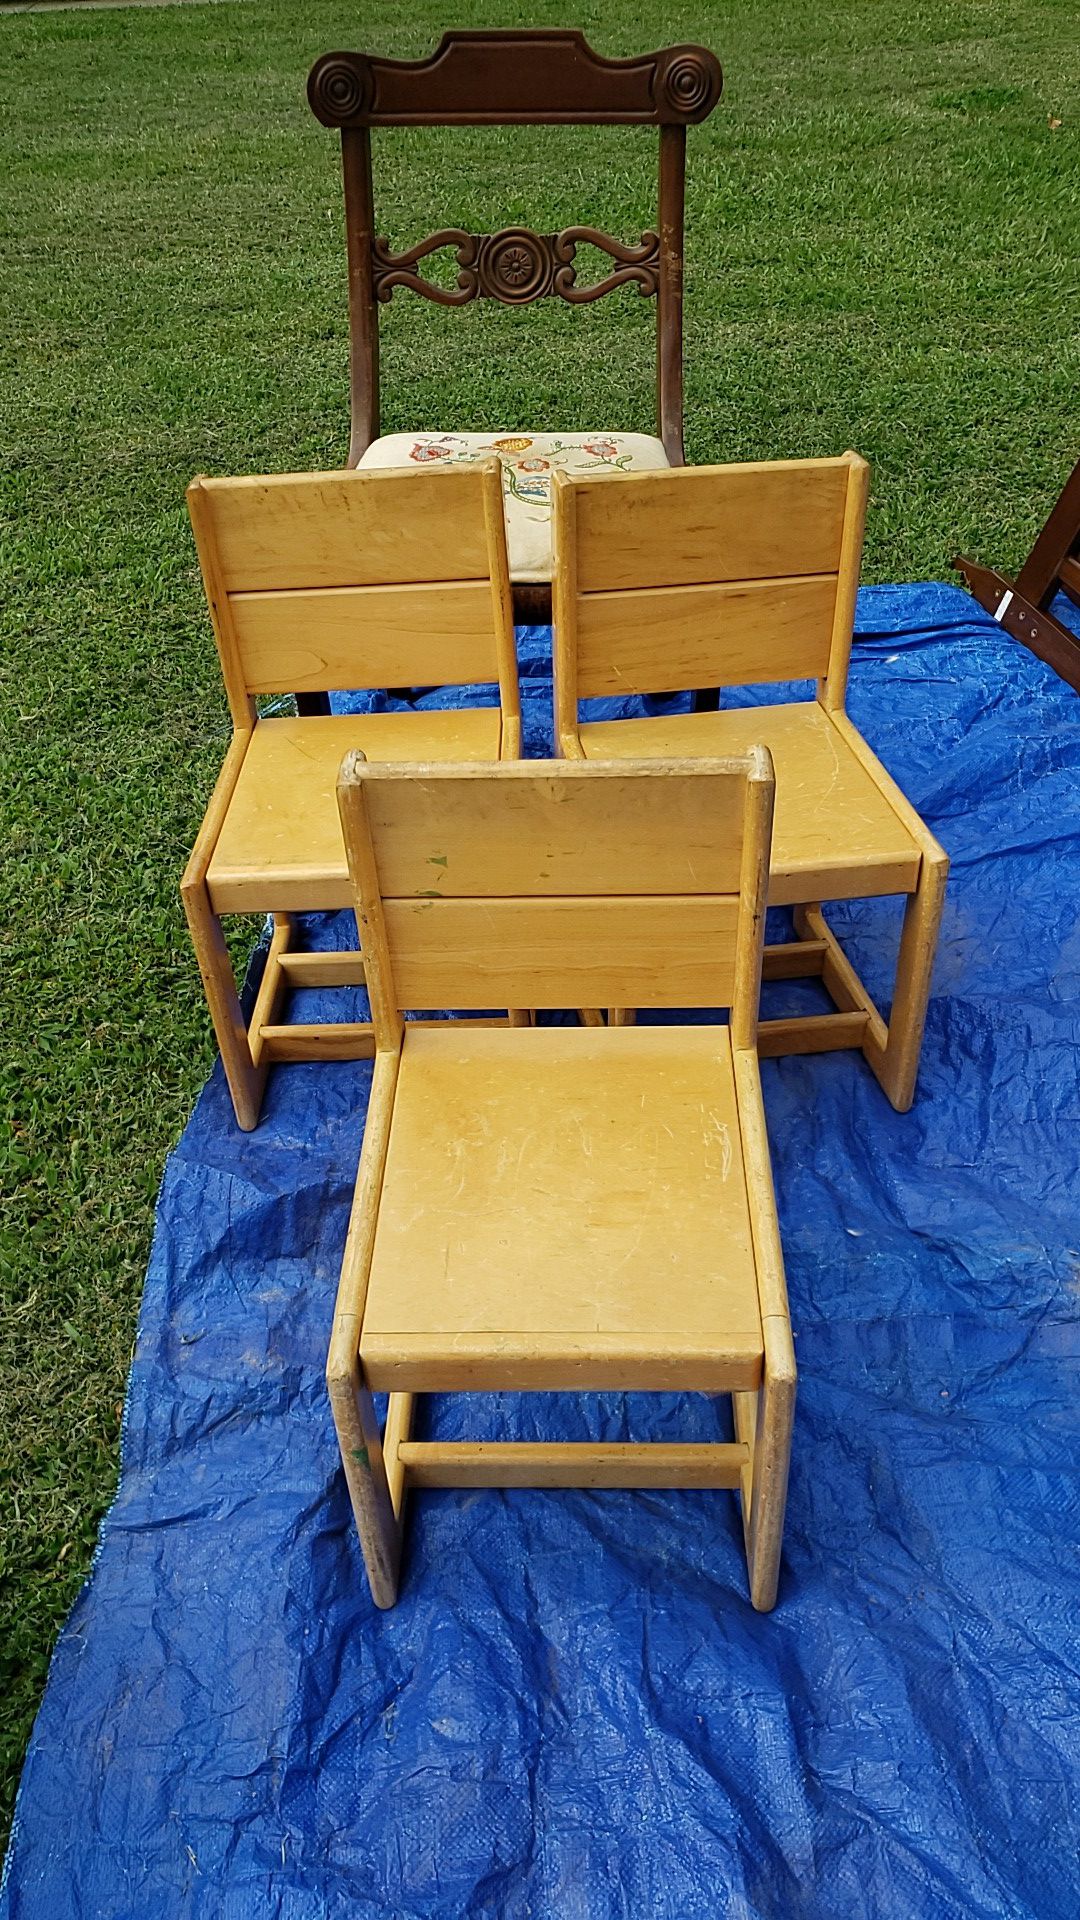 3 wooden kid chairs